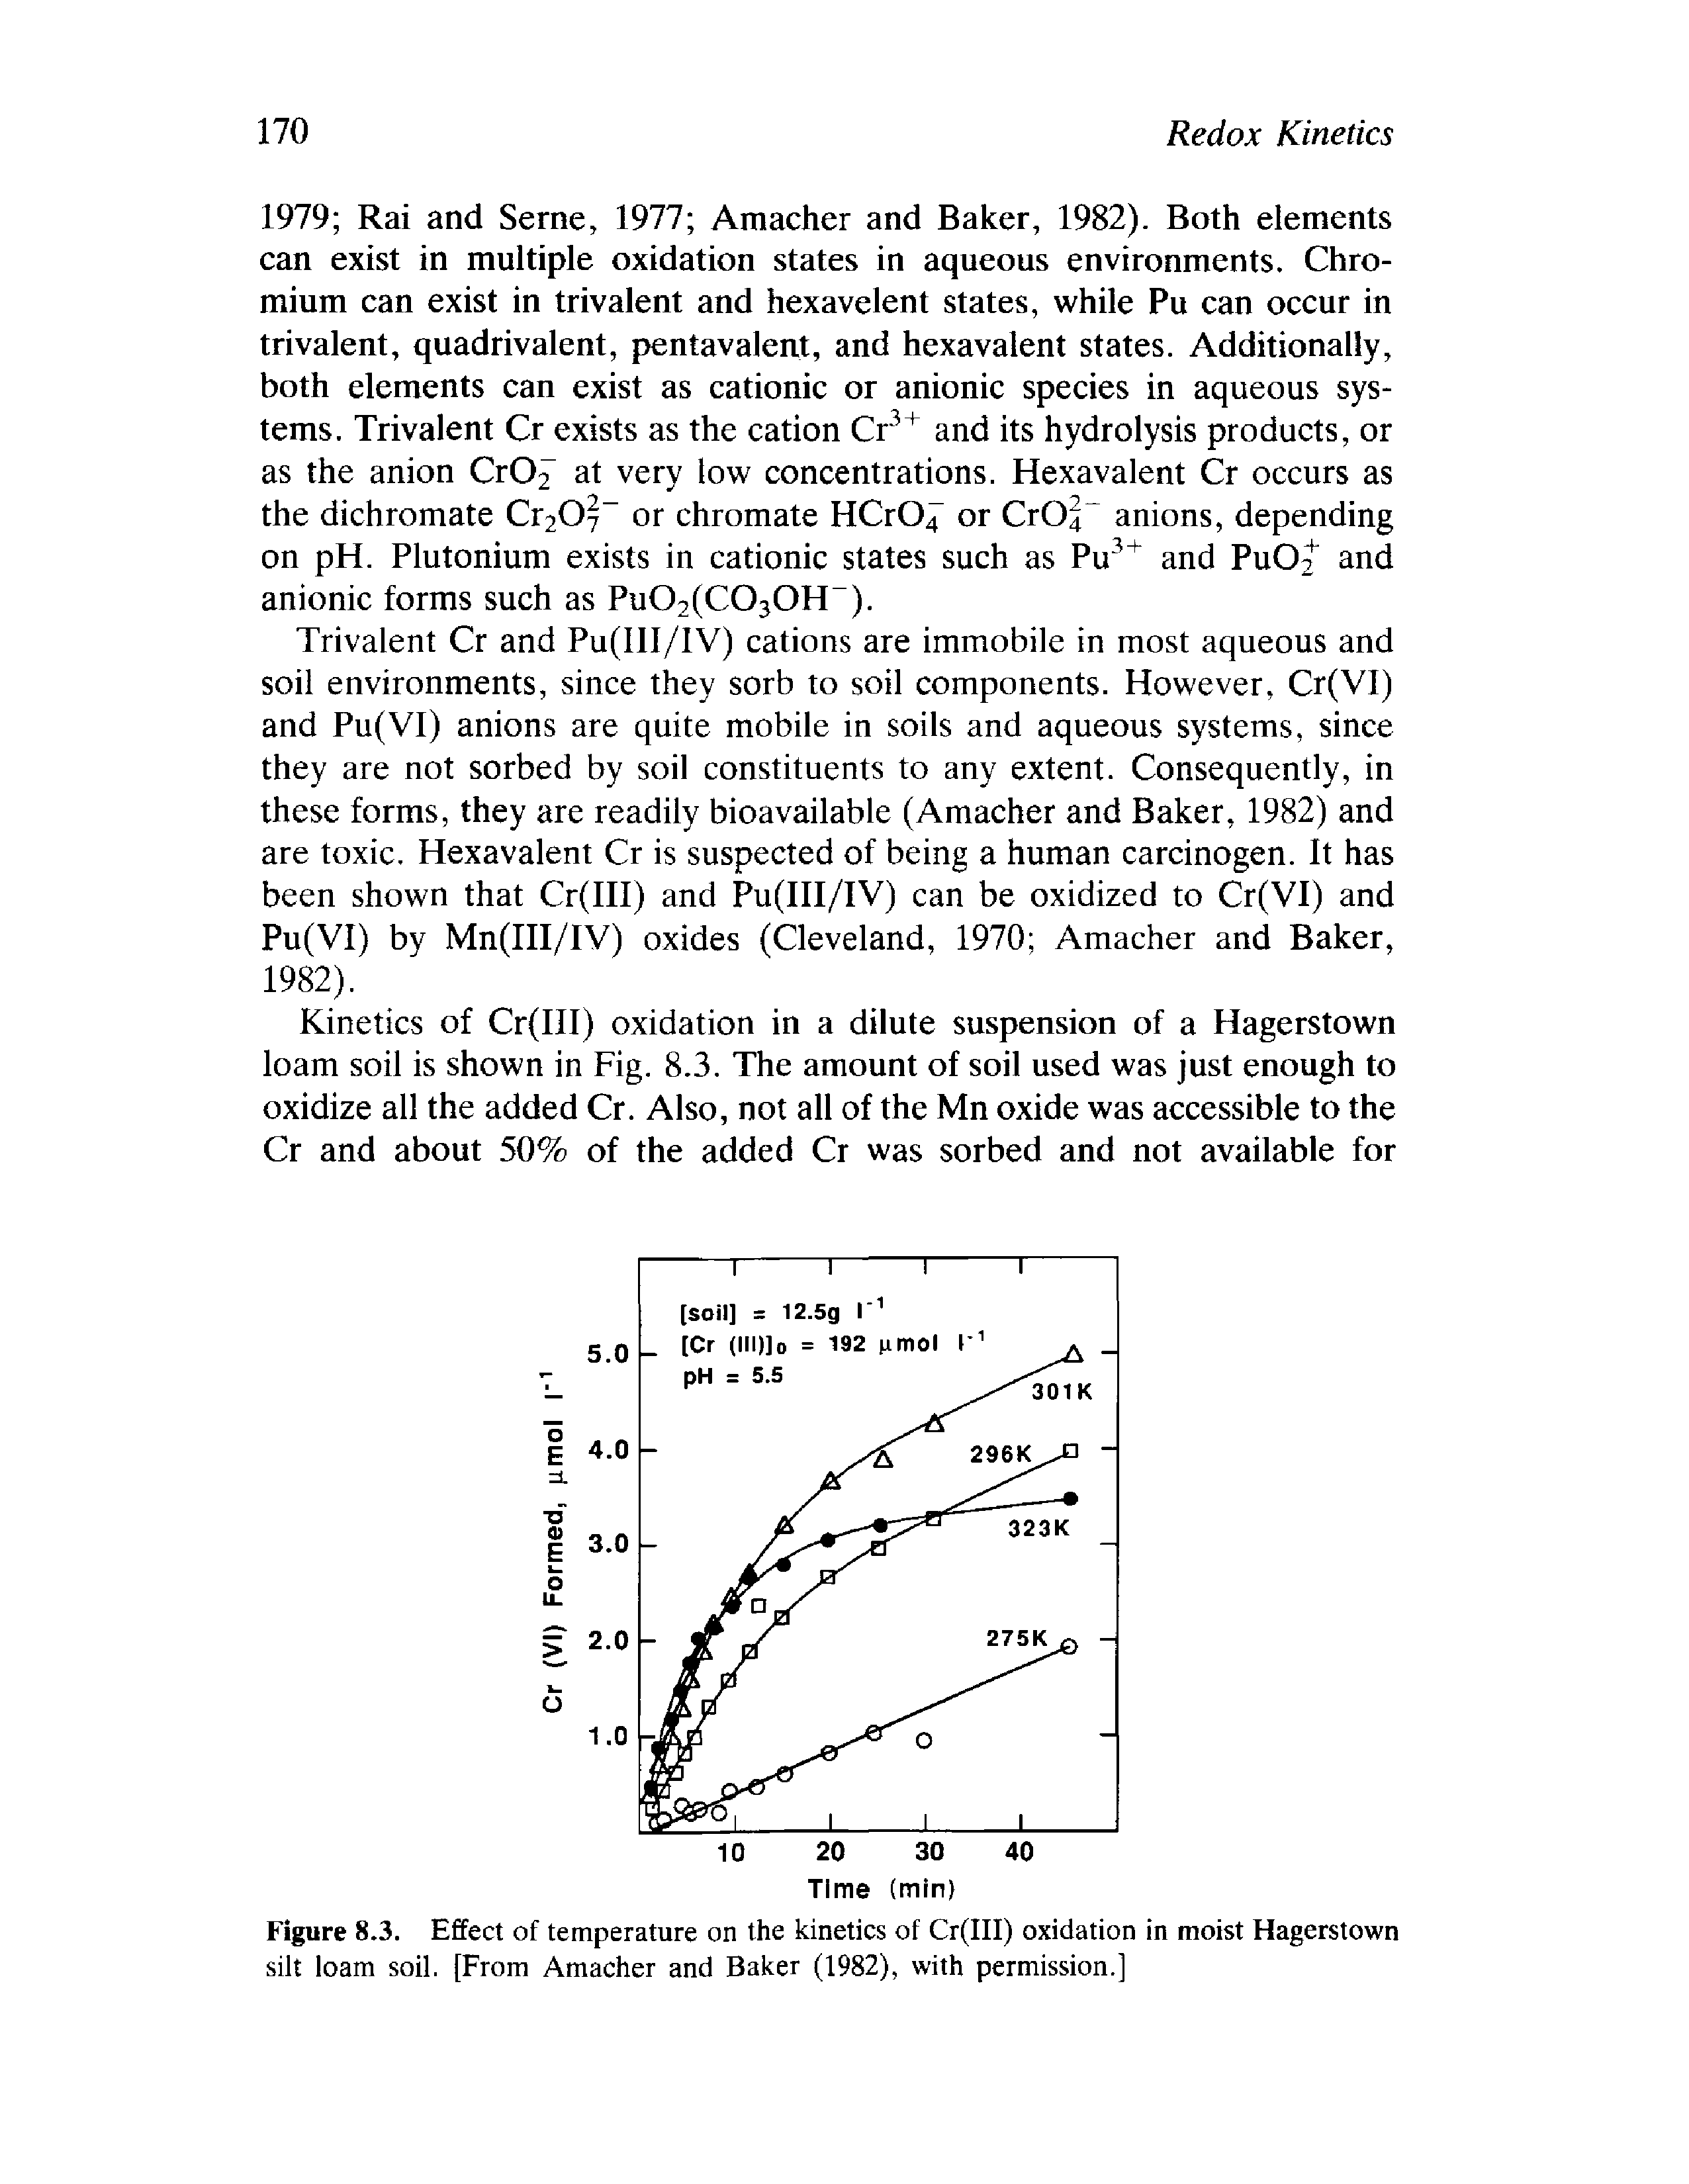 Figure 8.3. Effect of temperature on the kinetics of Cr(III) oxidation in moist Hagerstown silt loam soil. [From Amacher and Baker (1982), with permission.]...